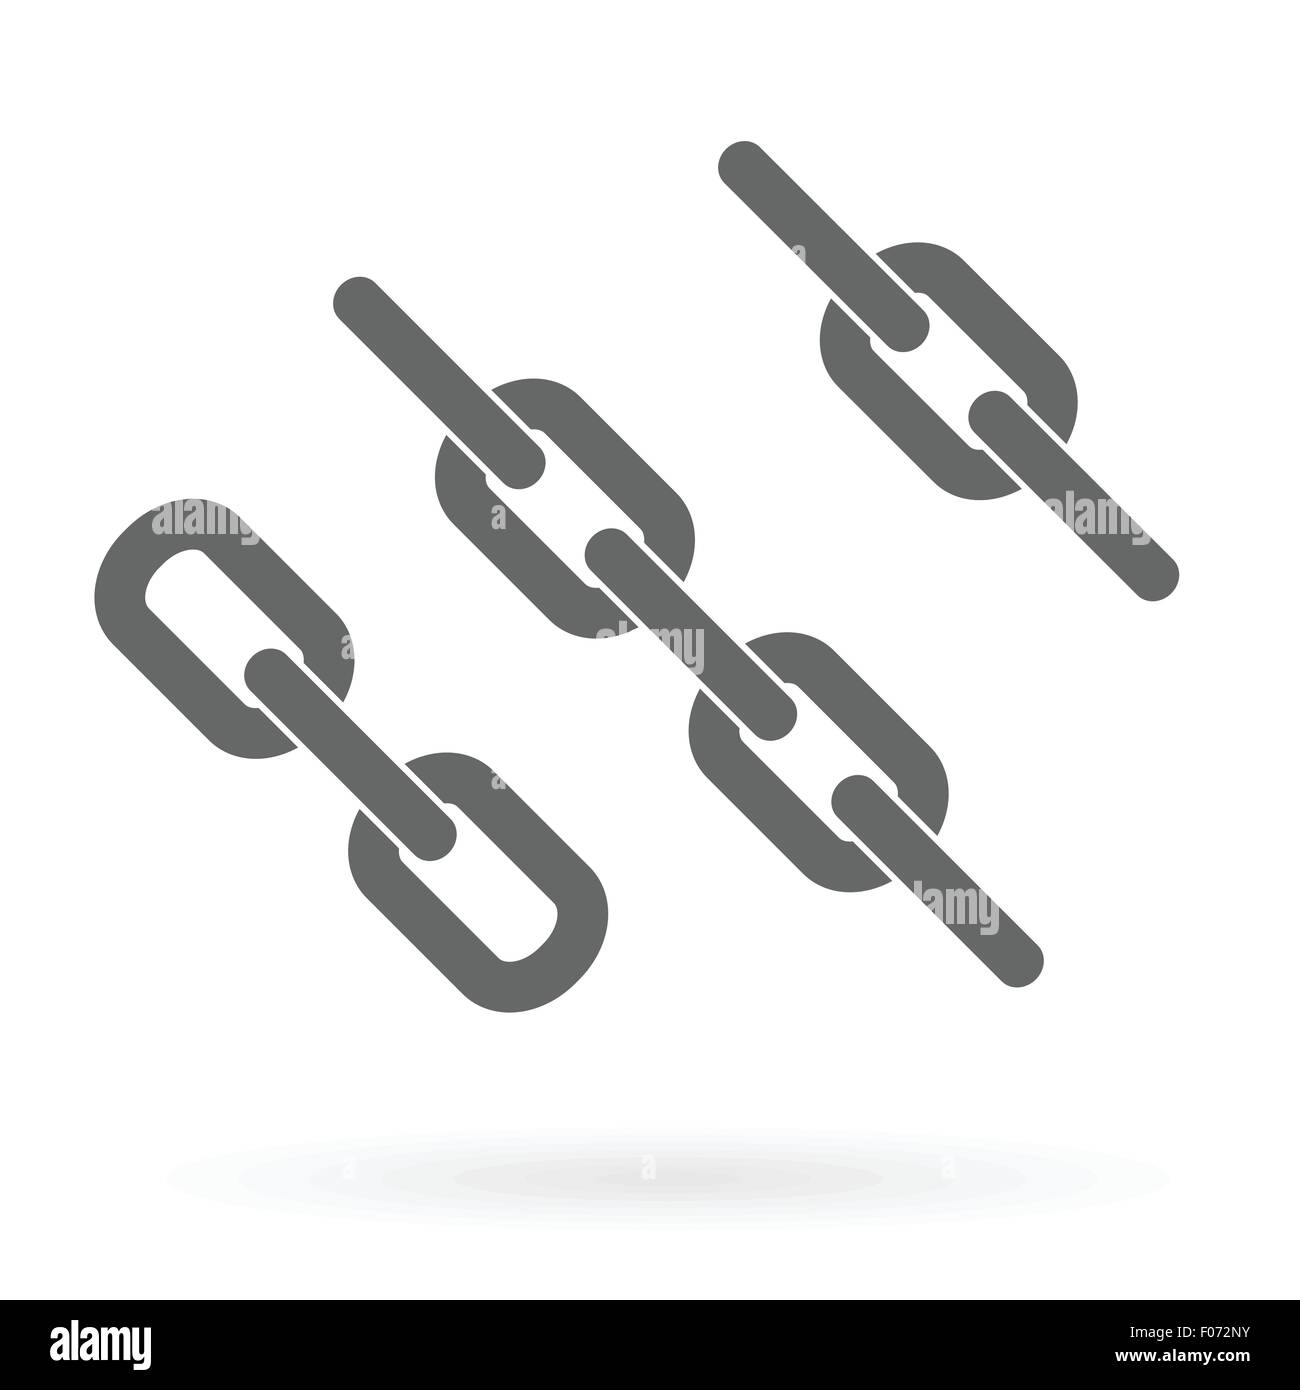 chains icon design isolated vector illustration Stock Vector